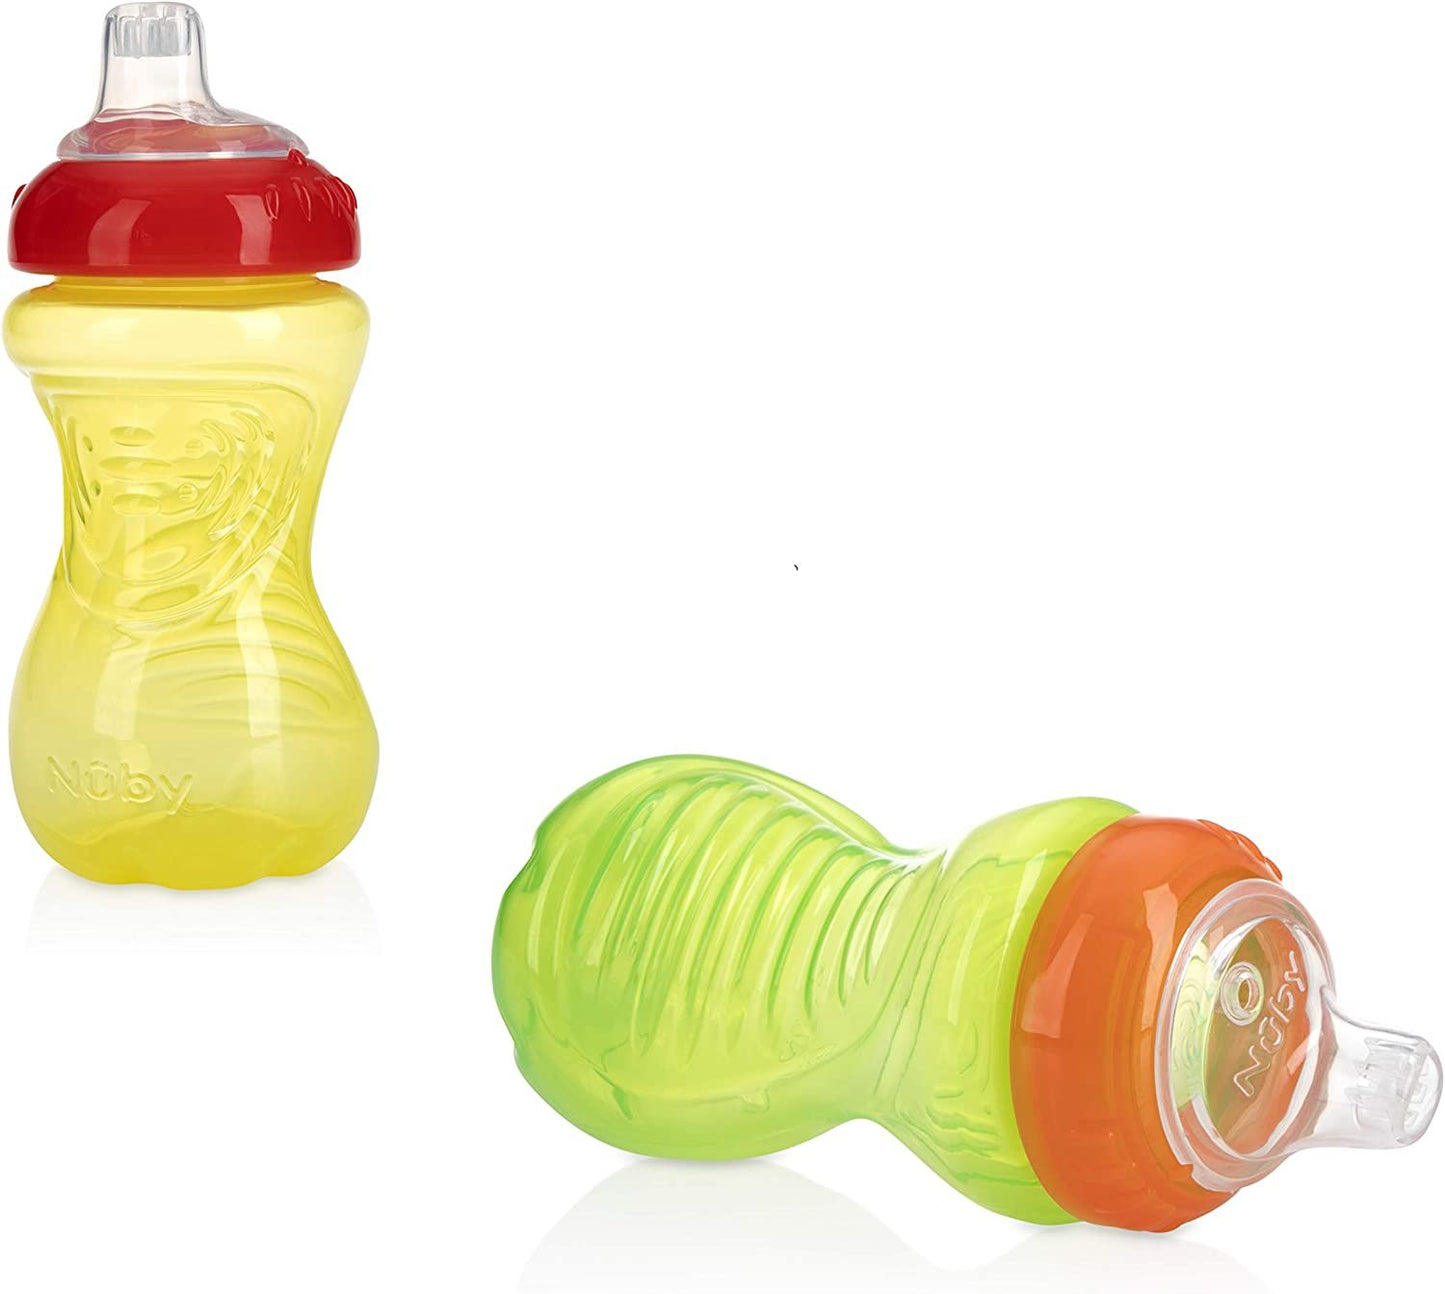 Nuby No-Spill Easy Grip Cup, 10 Ounce (Green/Yellow)